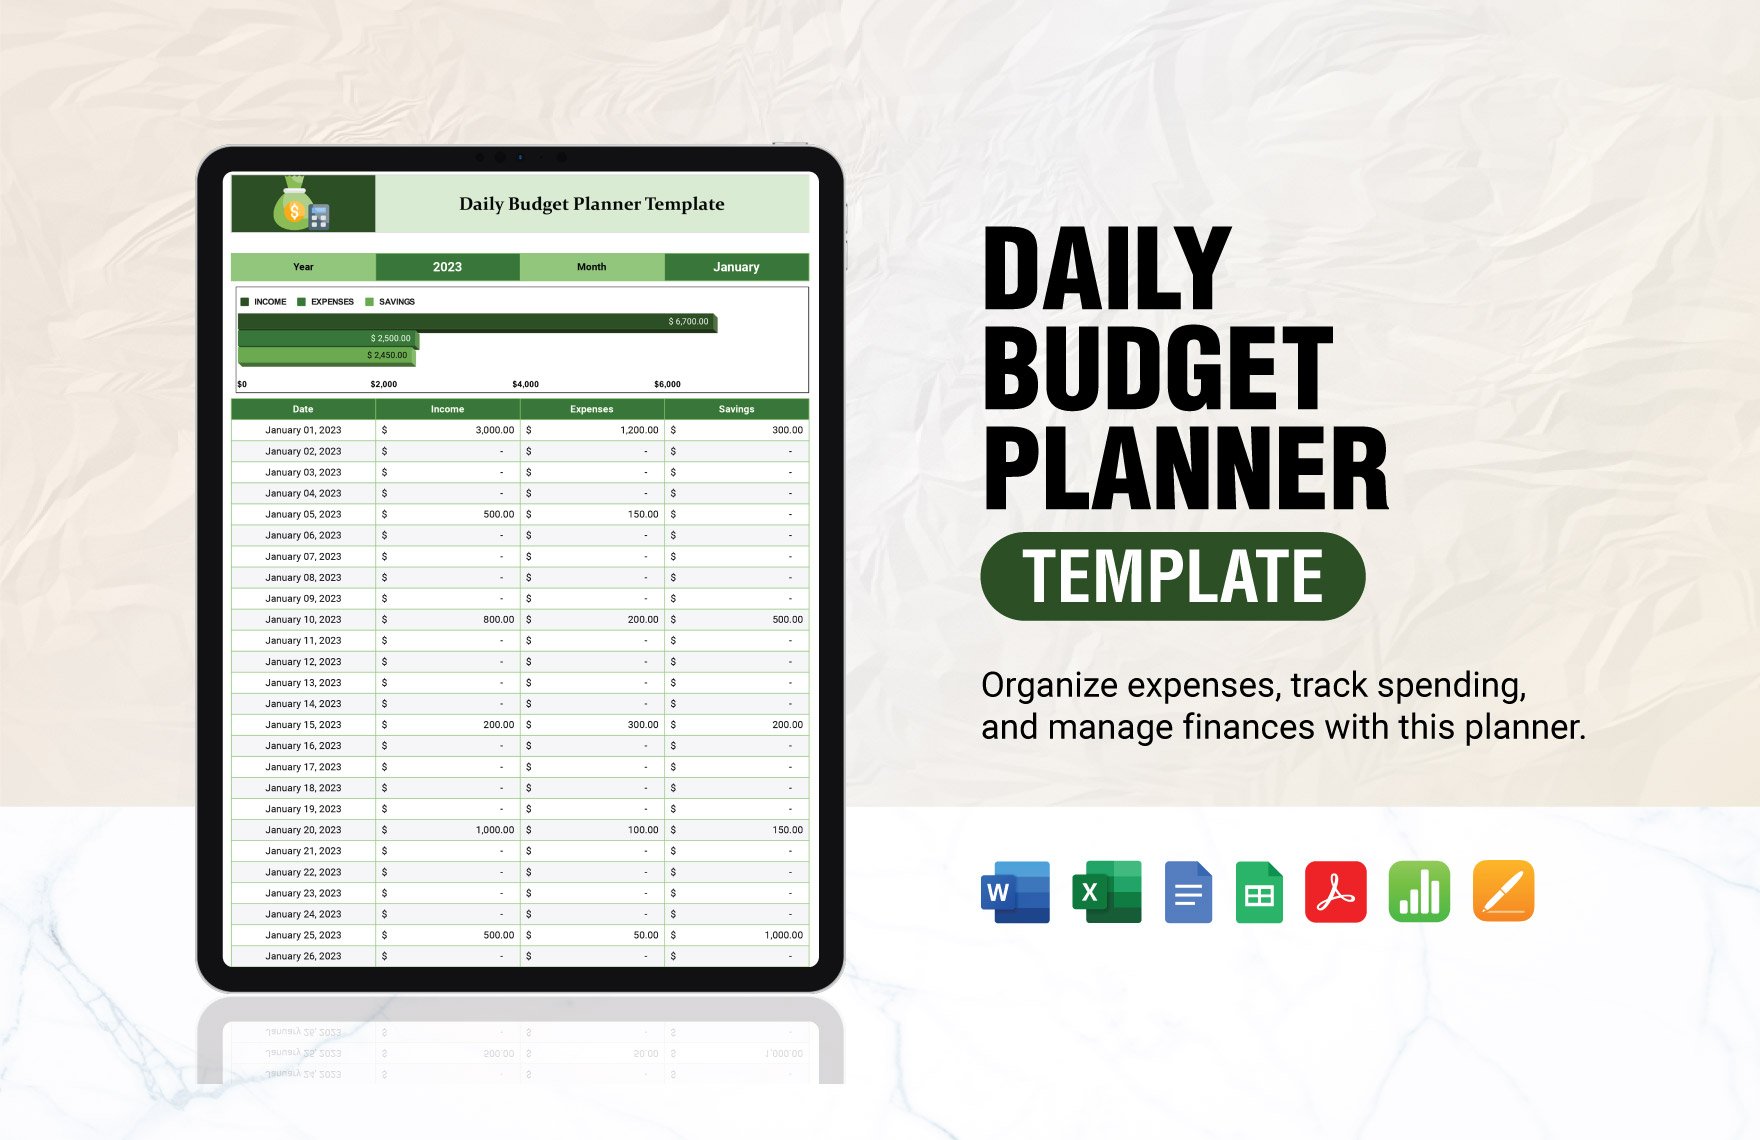 Daily Budget Planner Template